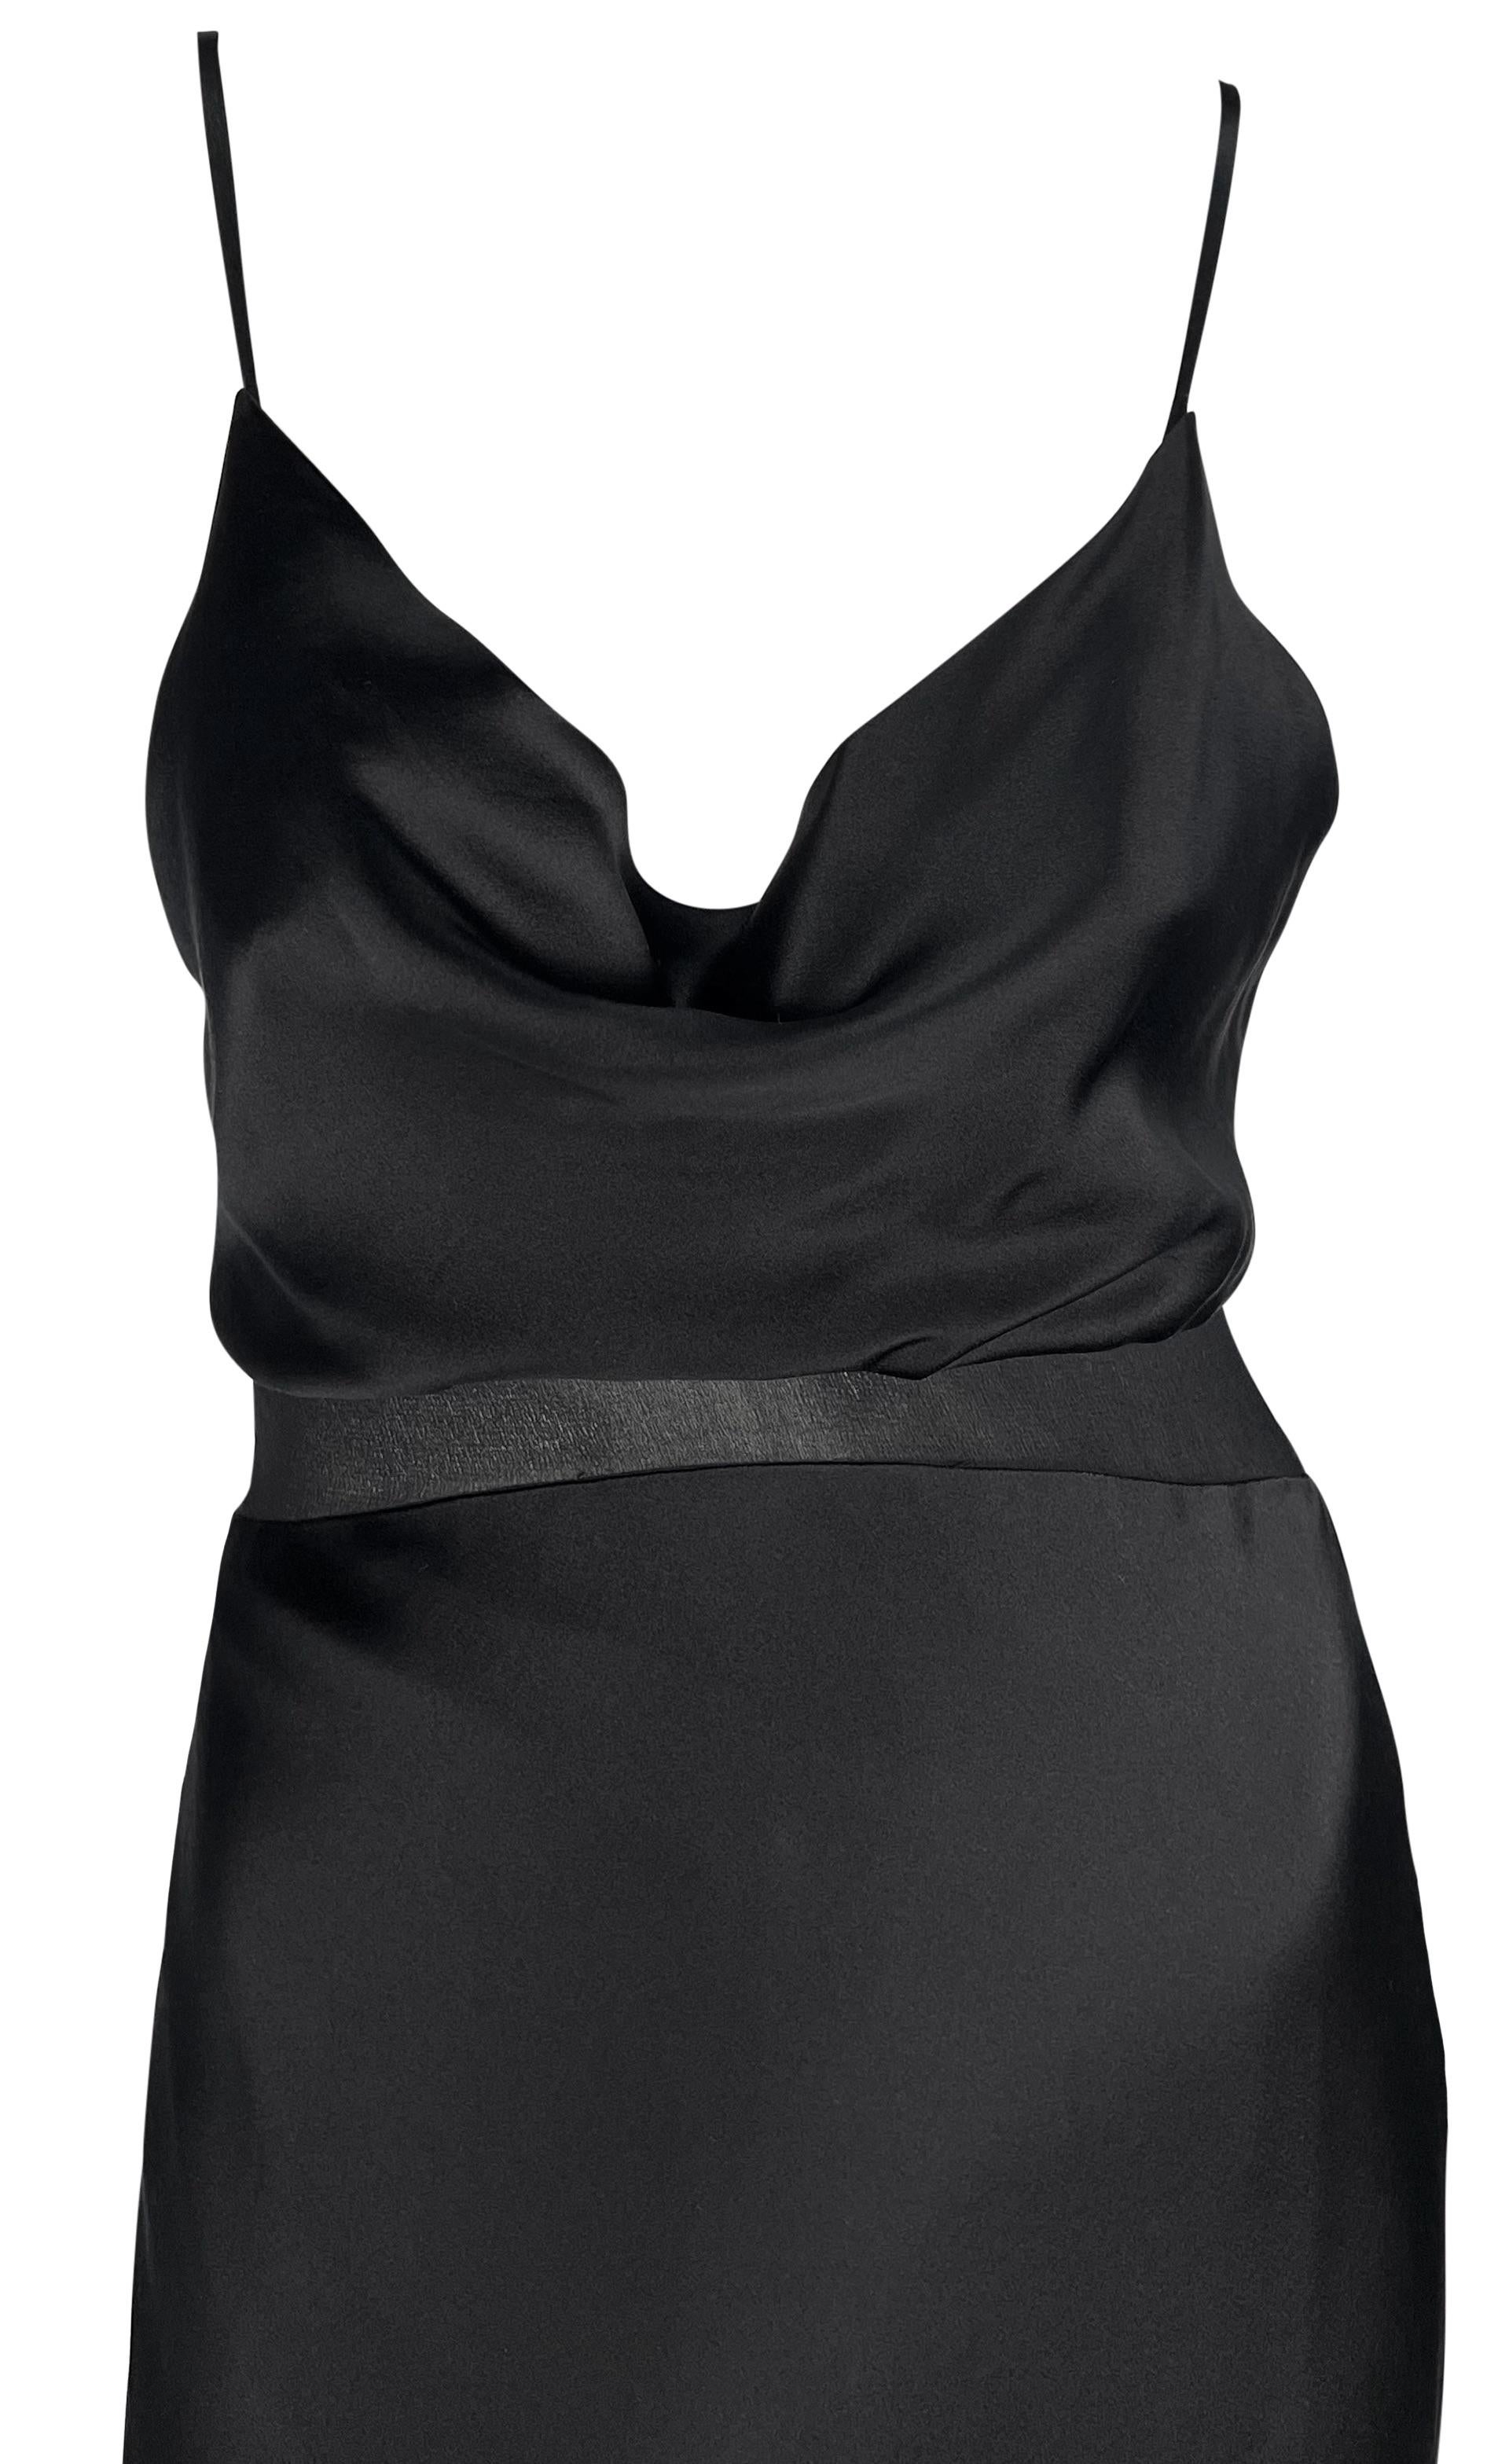 Donatella Versace designed this sexy little black satin Gianni Versace dress with a sheer panel running under the bust and across the back. This chic slip-style dress features a cowl neckline, spaghetti straps, and a lightly flared hem. Simple,